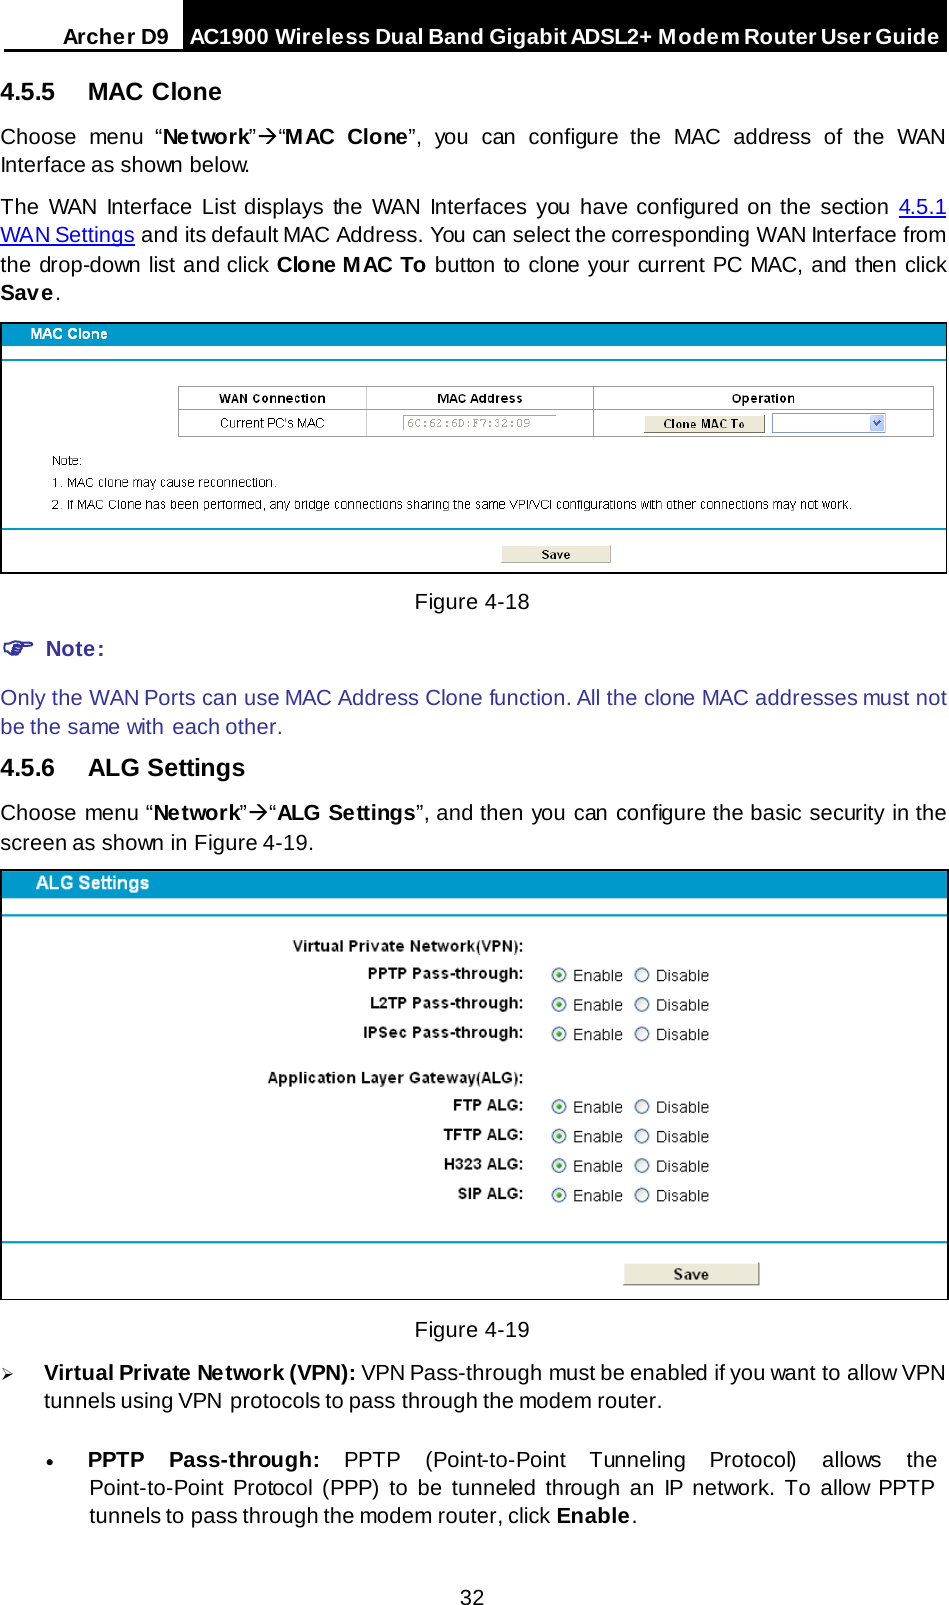 Arche r D9 AC1900 Wireless Dual Band Gigabit ADSL2+ Modem Router User Guide  4.5.5 MAC Clone Choose menu “Ne twork”“M AC  Clone”, you can configure the MAC address of the  WAN Interface as shown below. The WAN Interface List displays the WAN Interfaces you have configured on the section 4.5.1 WAN Settings and its default MAC Address. You can select the corresponding WAN Interface from the drop-down list and click Clone MAC To button to clone your current PC MAC, and then click Save.  Figure 4-18  Note: Only the WAN Ports can use MAC Address Clone function. All the clone MAC addresses must not be the same with each other. 4.5.6 ALG Settings Choose menu “Ne twork”“ALG Settings”, and then you can configure the basic security in the screen as shown in Figure 4-19.  Figure 4-19  Virtual Private Network (VPN): VPN Pass-through must be enabled if you want to allow VPN tunnels using VPN  protocols to pass through the modem router. • PPTP Pass-through: PPTP  (Point-to-Point Tunneling Protocol) allows the Point-to-Point Protocol (PPP) to be tunneled through an IP network. To allow PPTP tunnels to pass through the modem router, click Enable. 32 